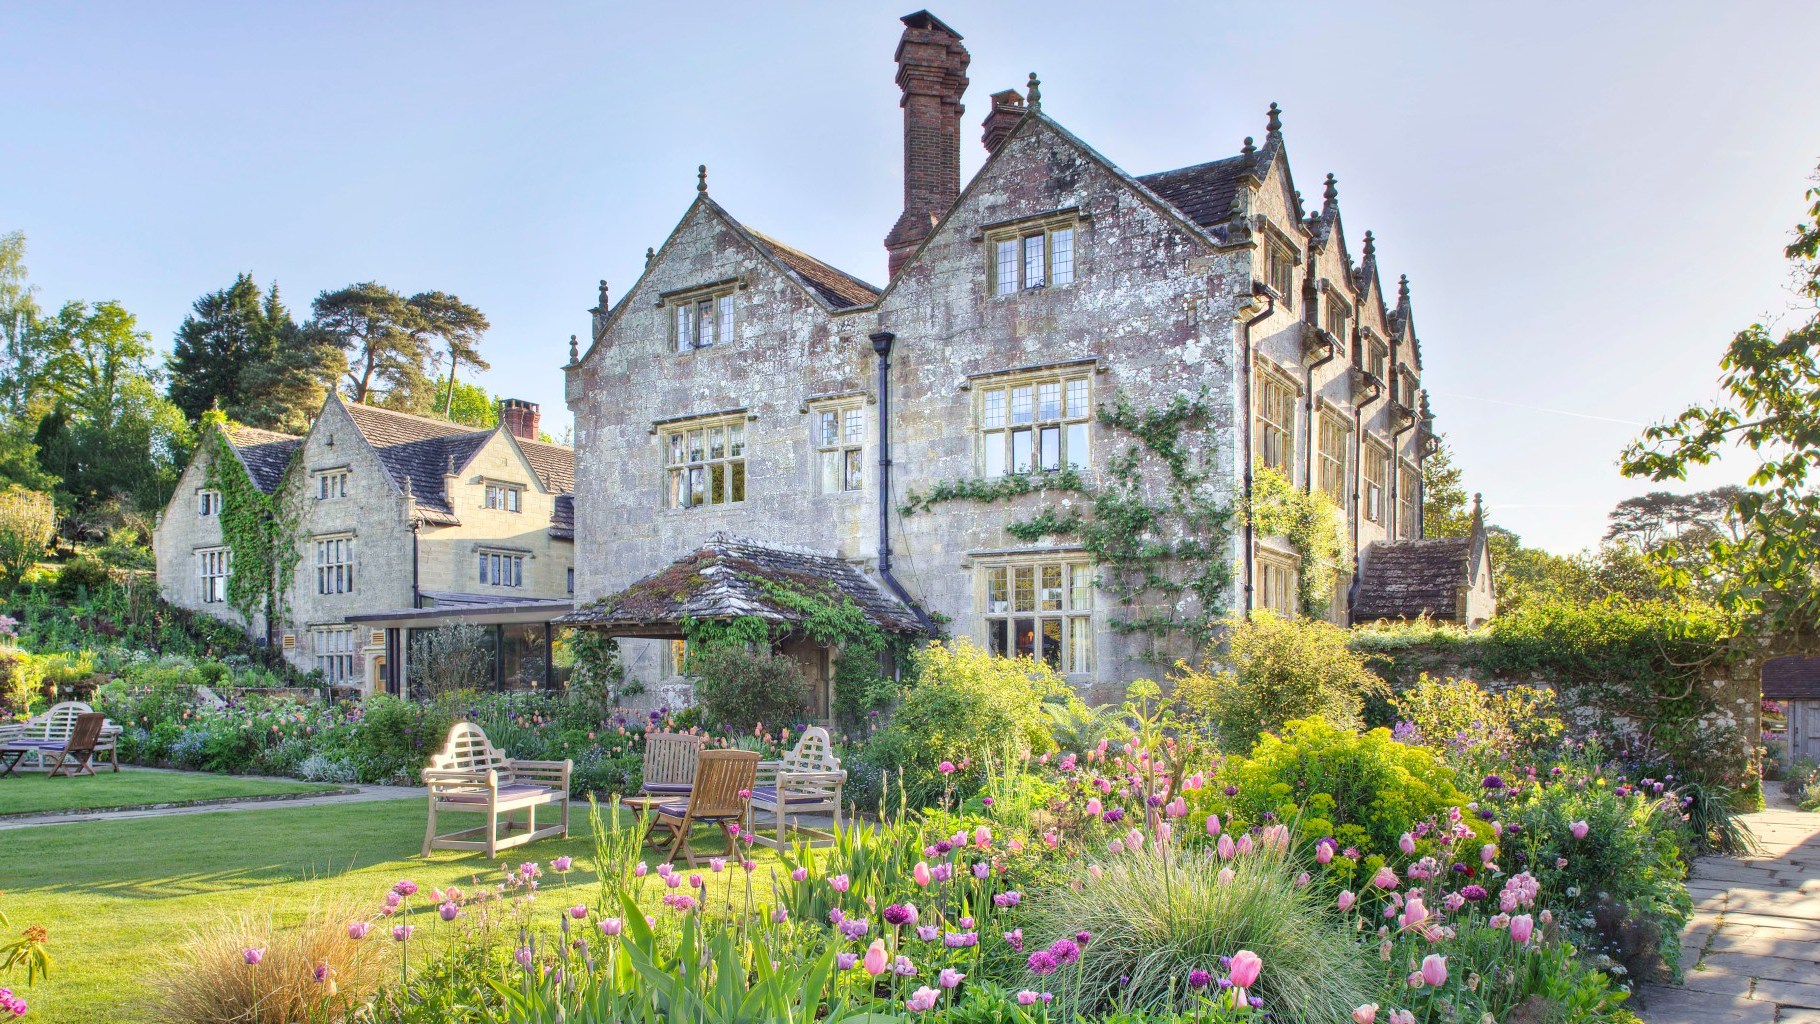 Gravetye Manor hotel review: Michelin-starred food and exquisite gardens in West Sussex